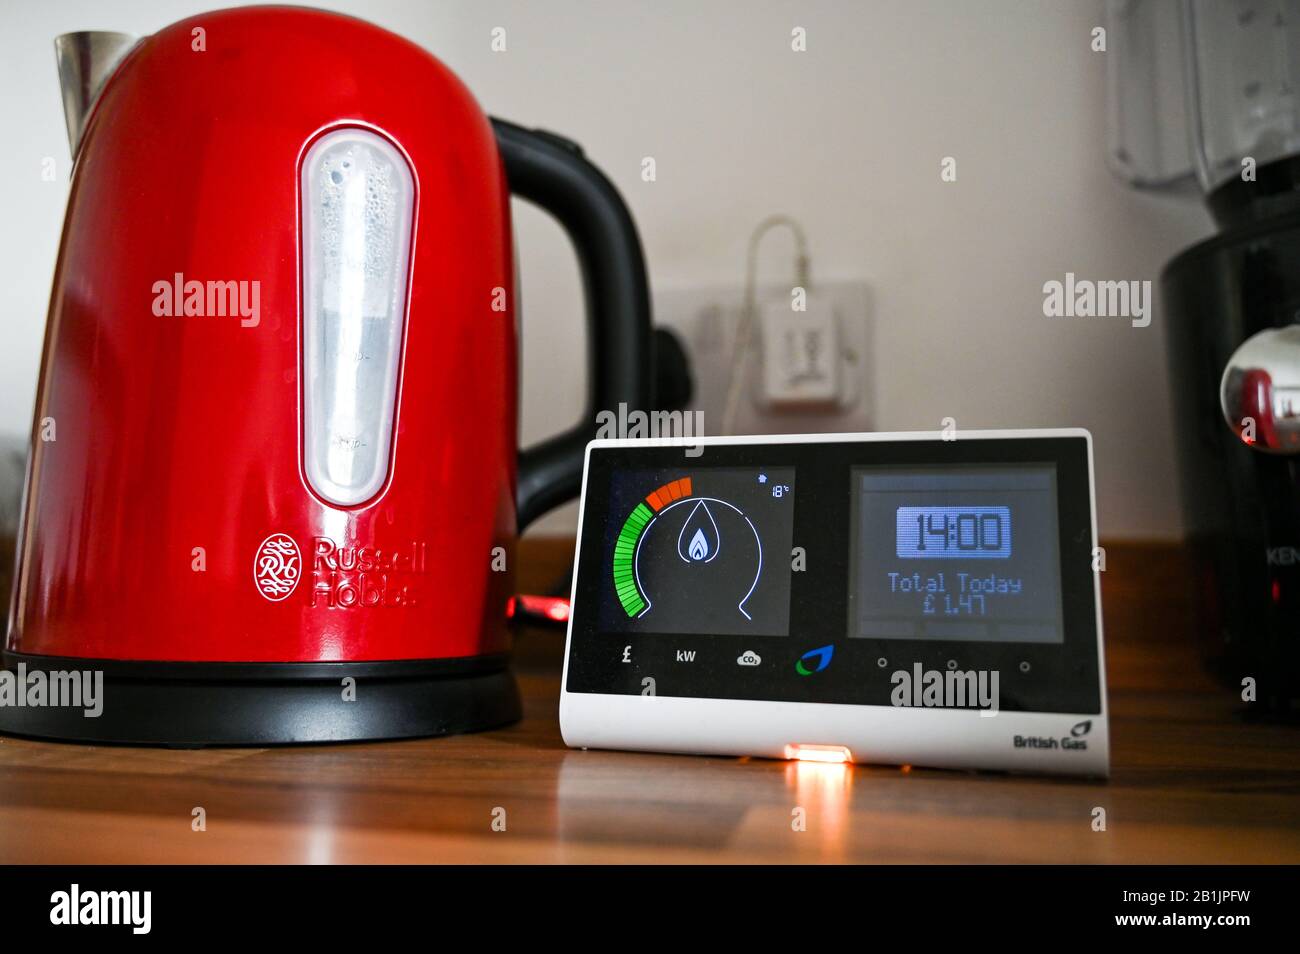 https://c8.alamy.com/comp/2B1JPFW/british-gas-smart-meter-measuring-domestic-energy-use-beside-a-russell-hobbs-electric-kettle-in-kitchen-2B1JPFW.jpg